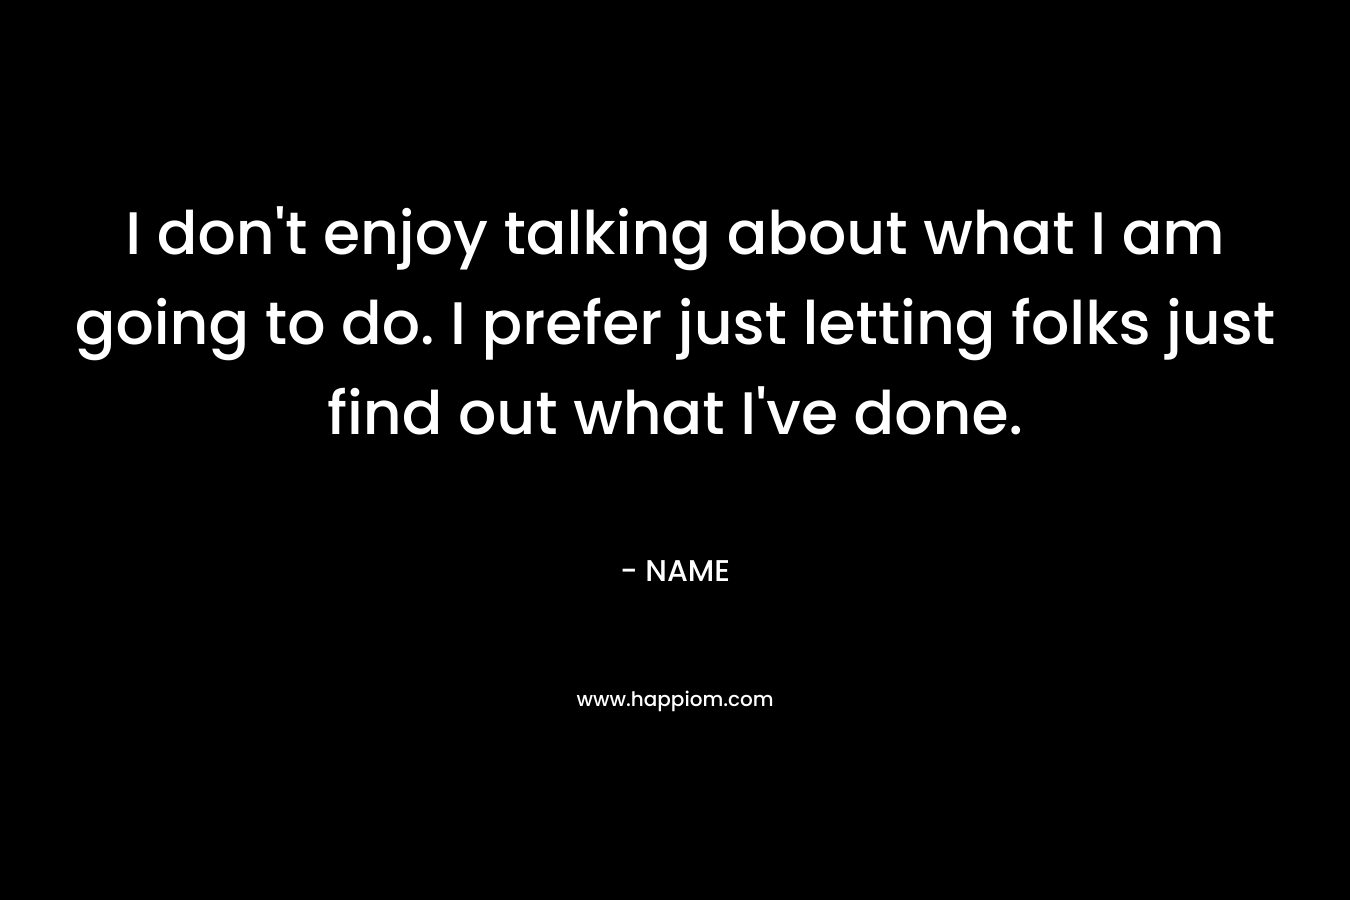 I don't enjoy talking about what I am going to do. I prefer just letting folks just find out what I've done.